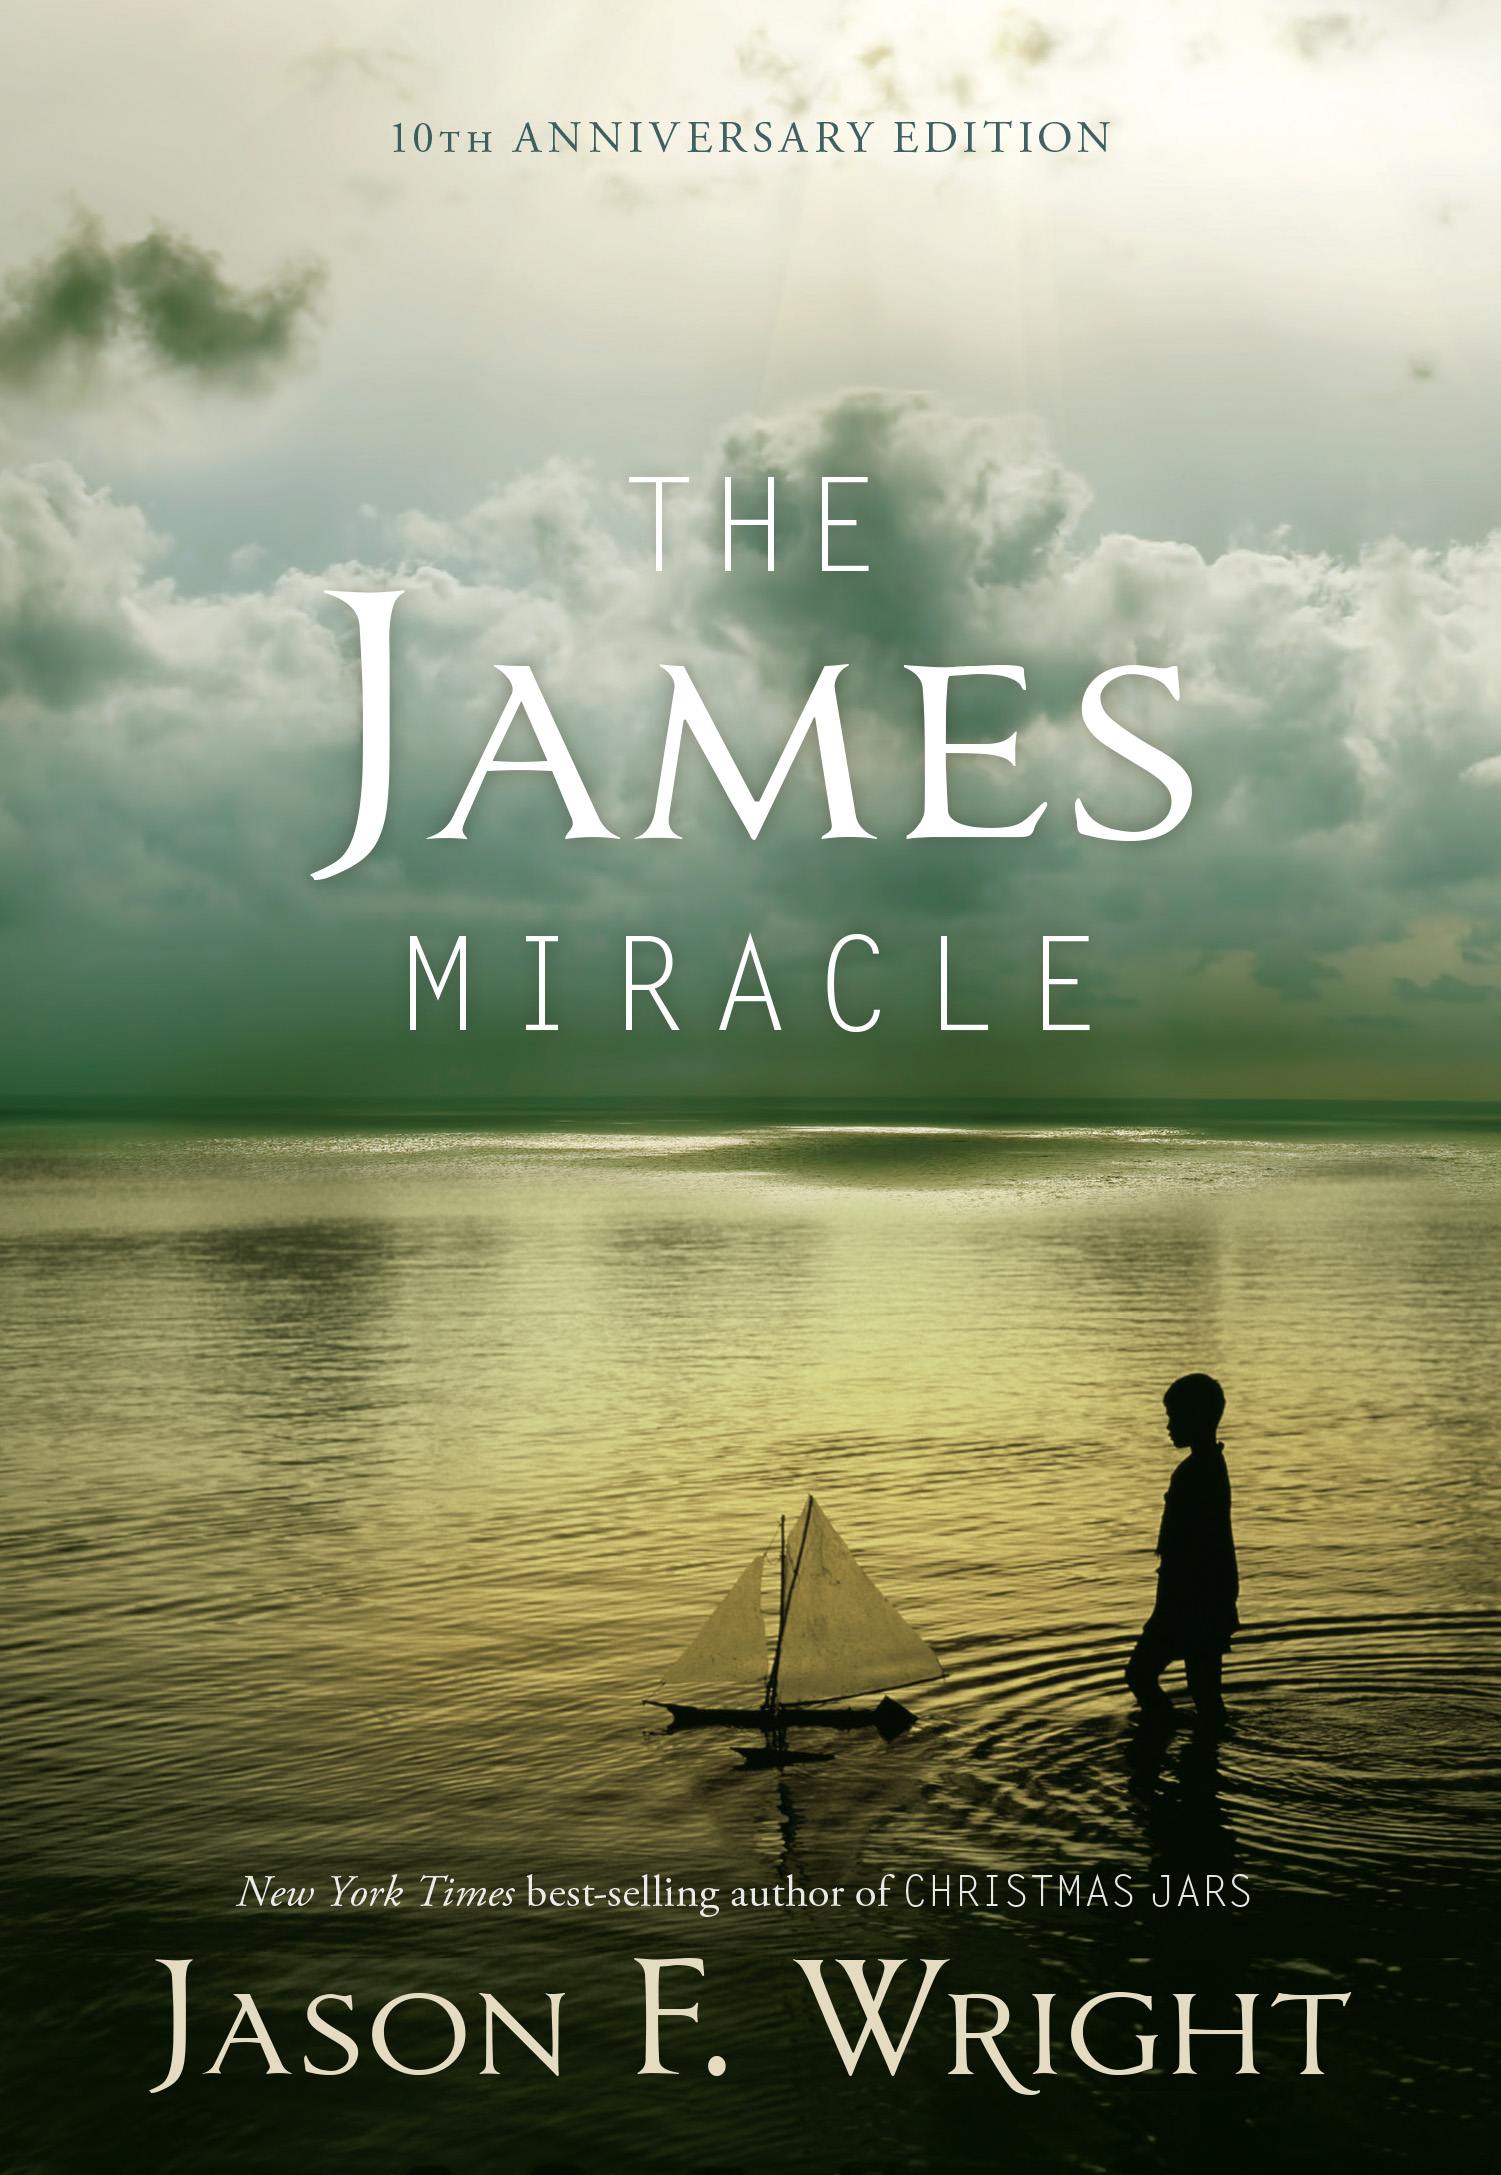 What is The James Miracle?